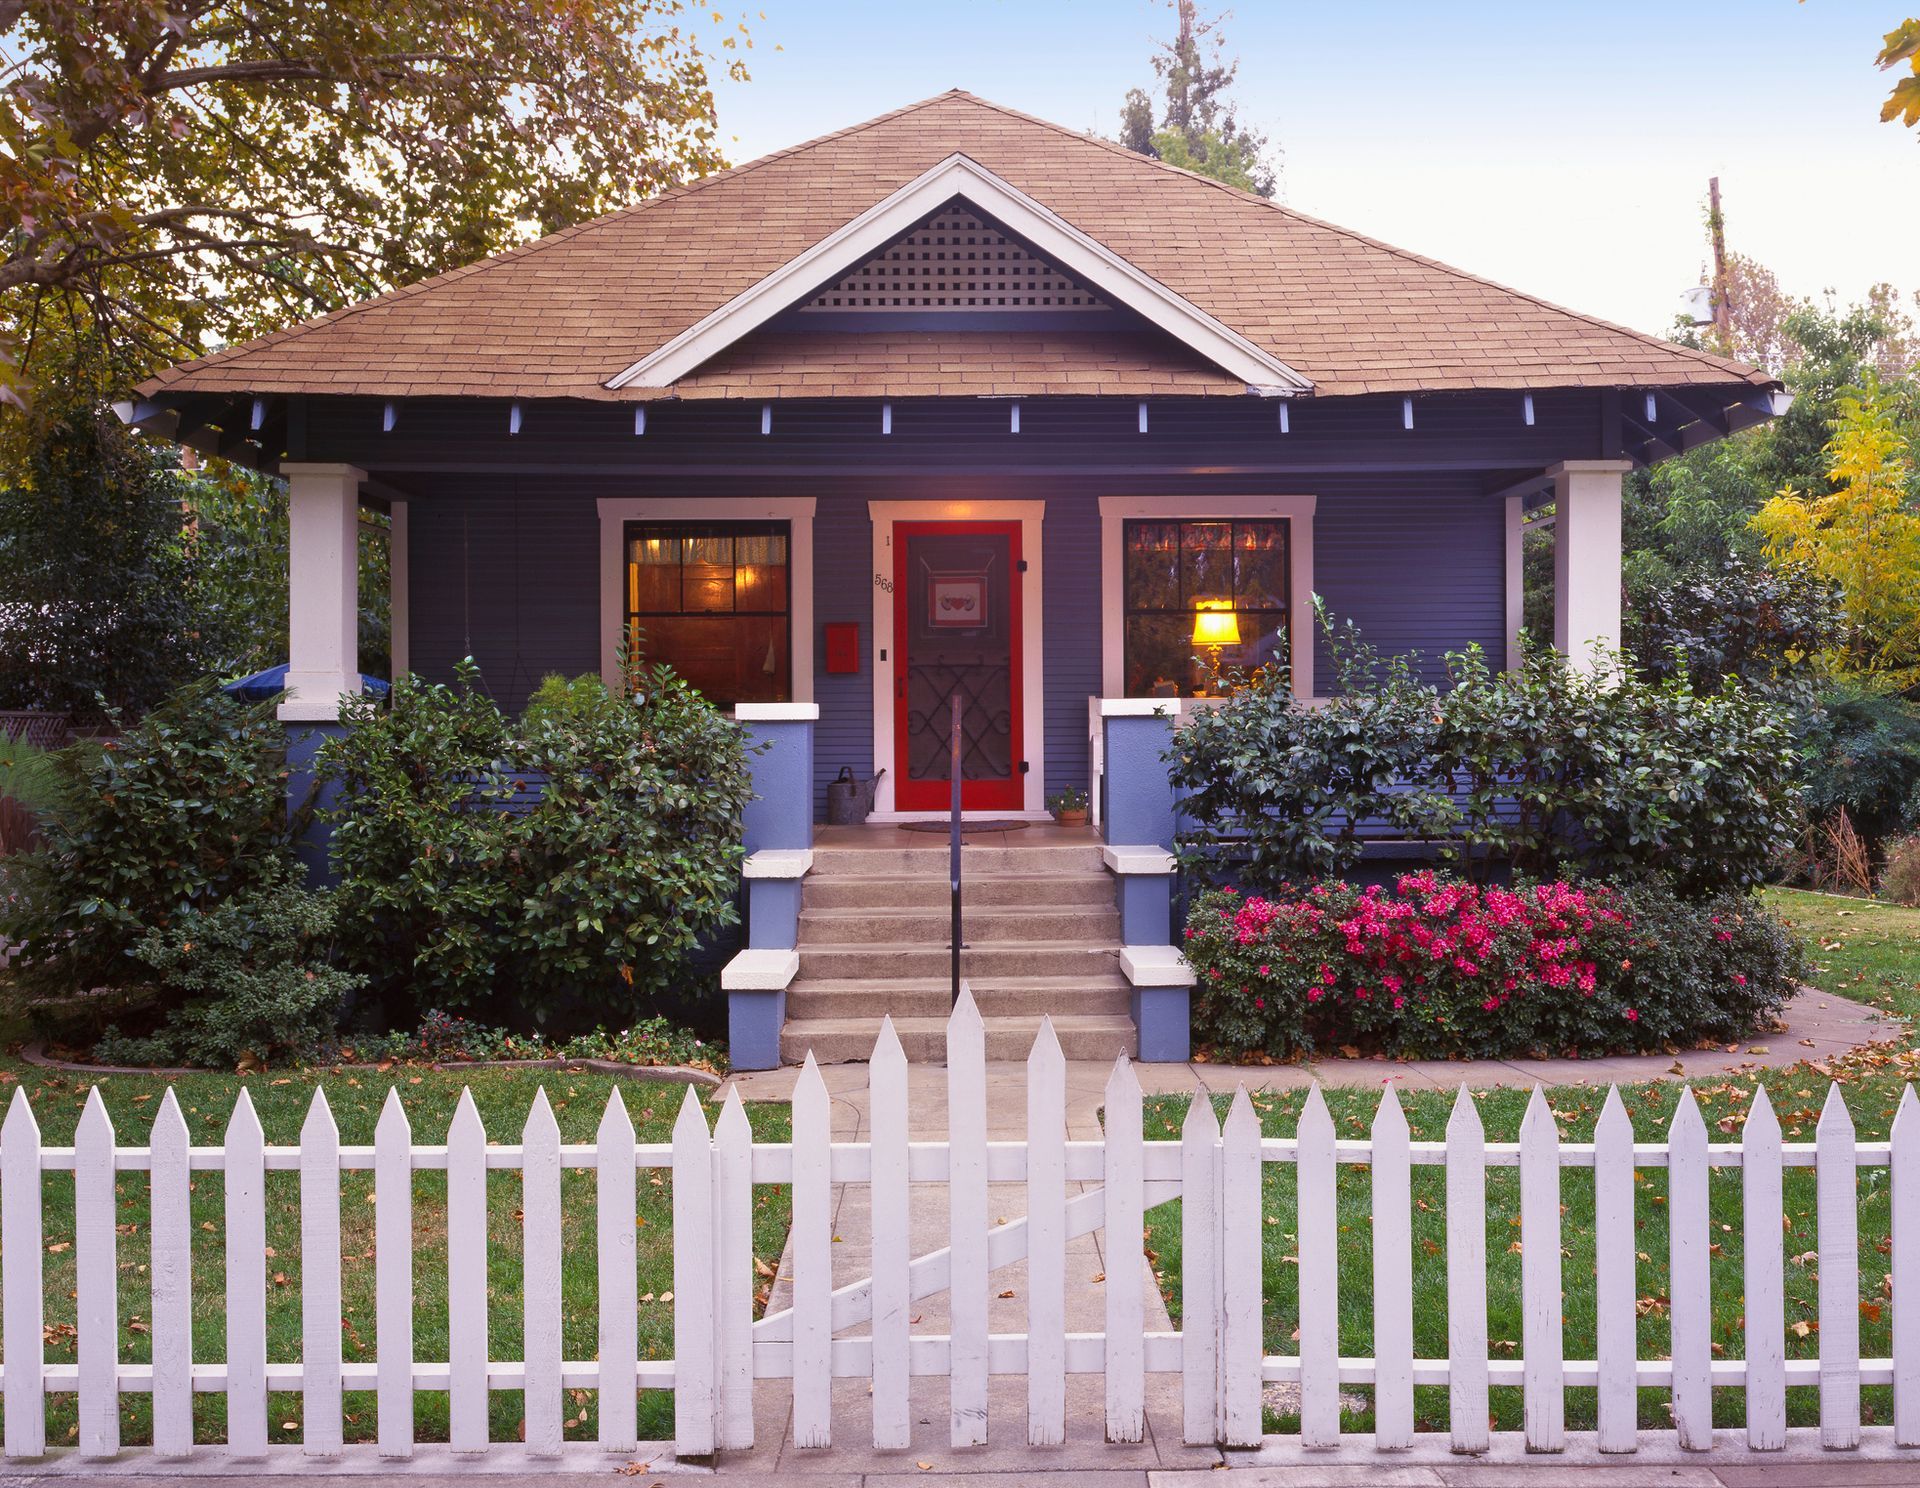 A blue house with a white picket fence around it